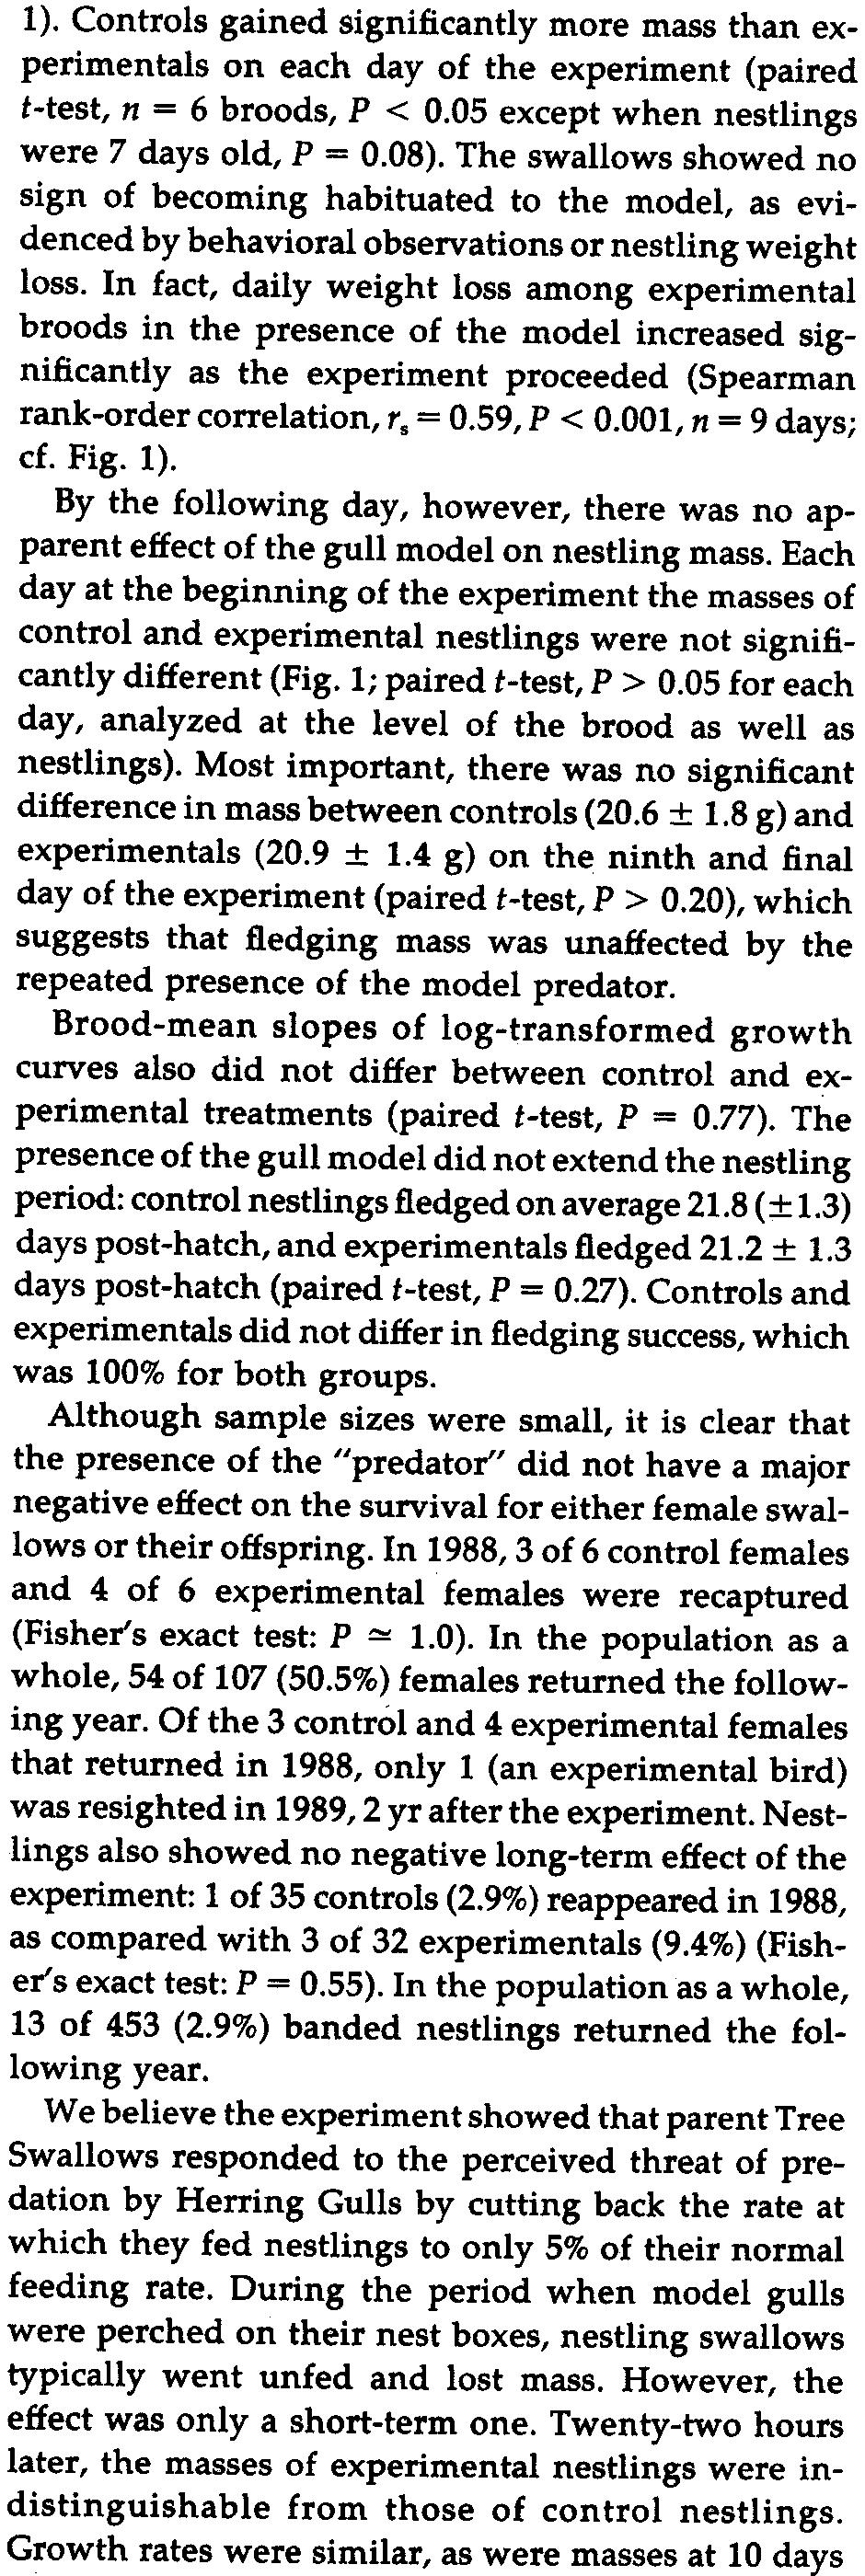 In fact, daily weight loss among experimental broods in the presence of the model increased significantly as the experiment proceeded (Spearman rank-order correlation, r s = 0.59, P < 0.